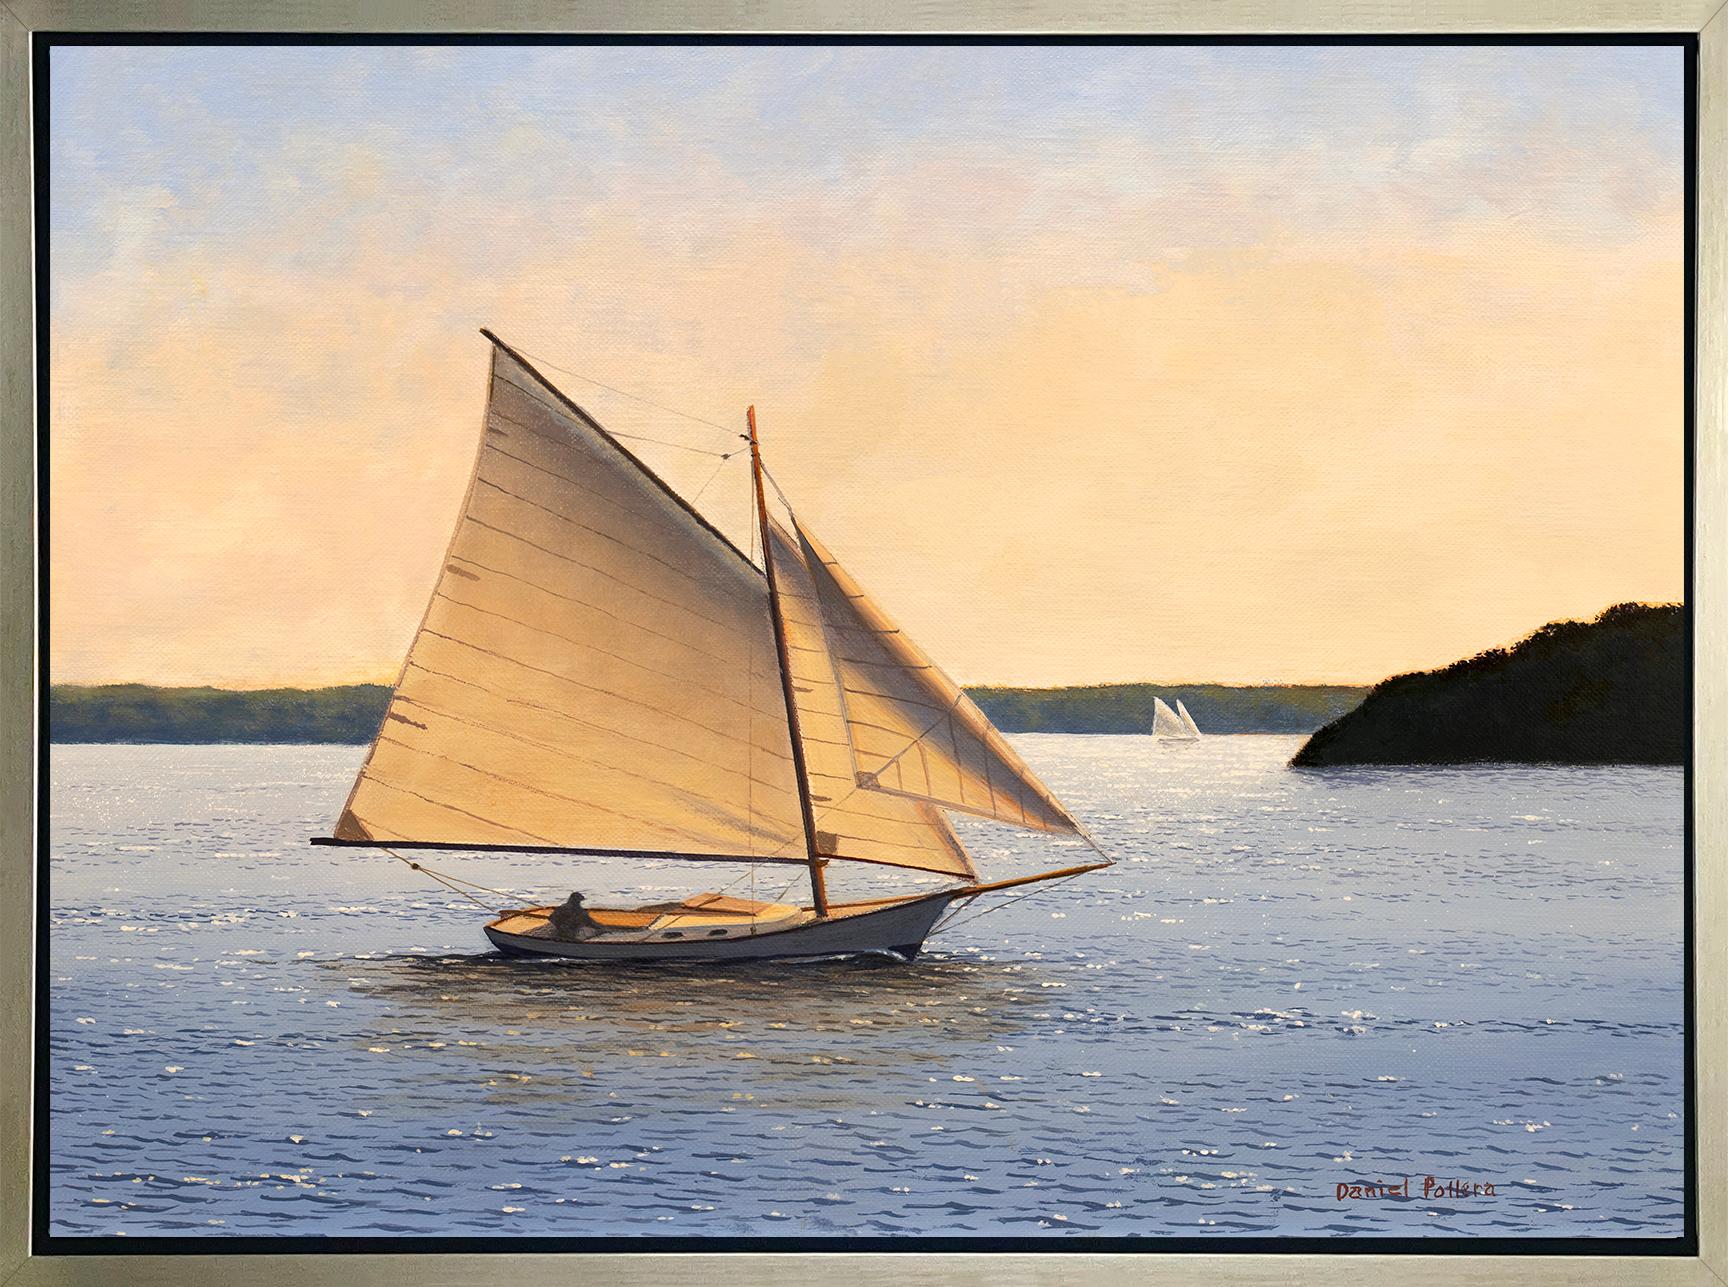 Daniel Pollera Landscape Print - "Sailing Out to Sea, " Framed Limited Edition Giclee Print, 9" x 12"